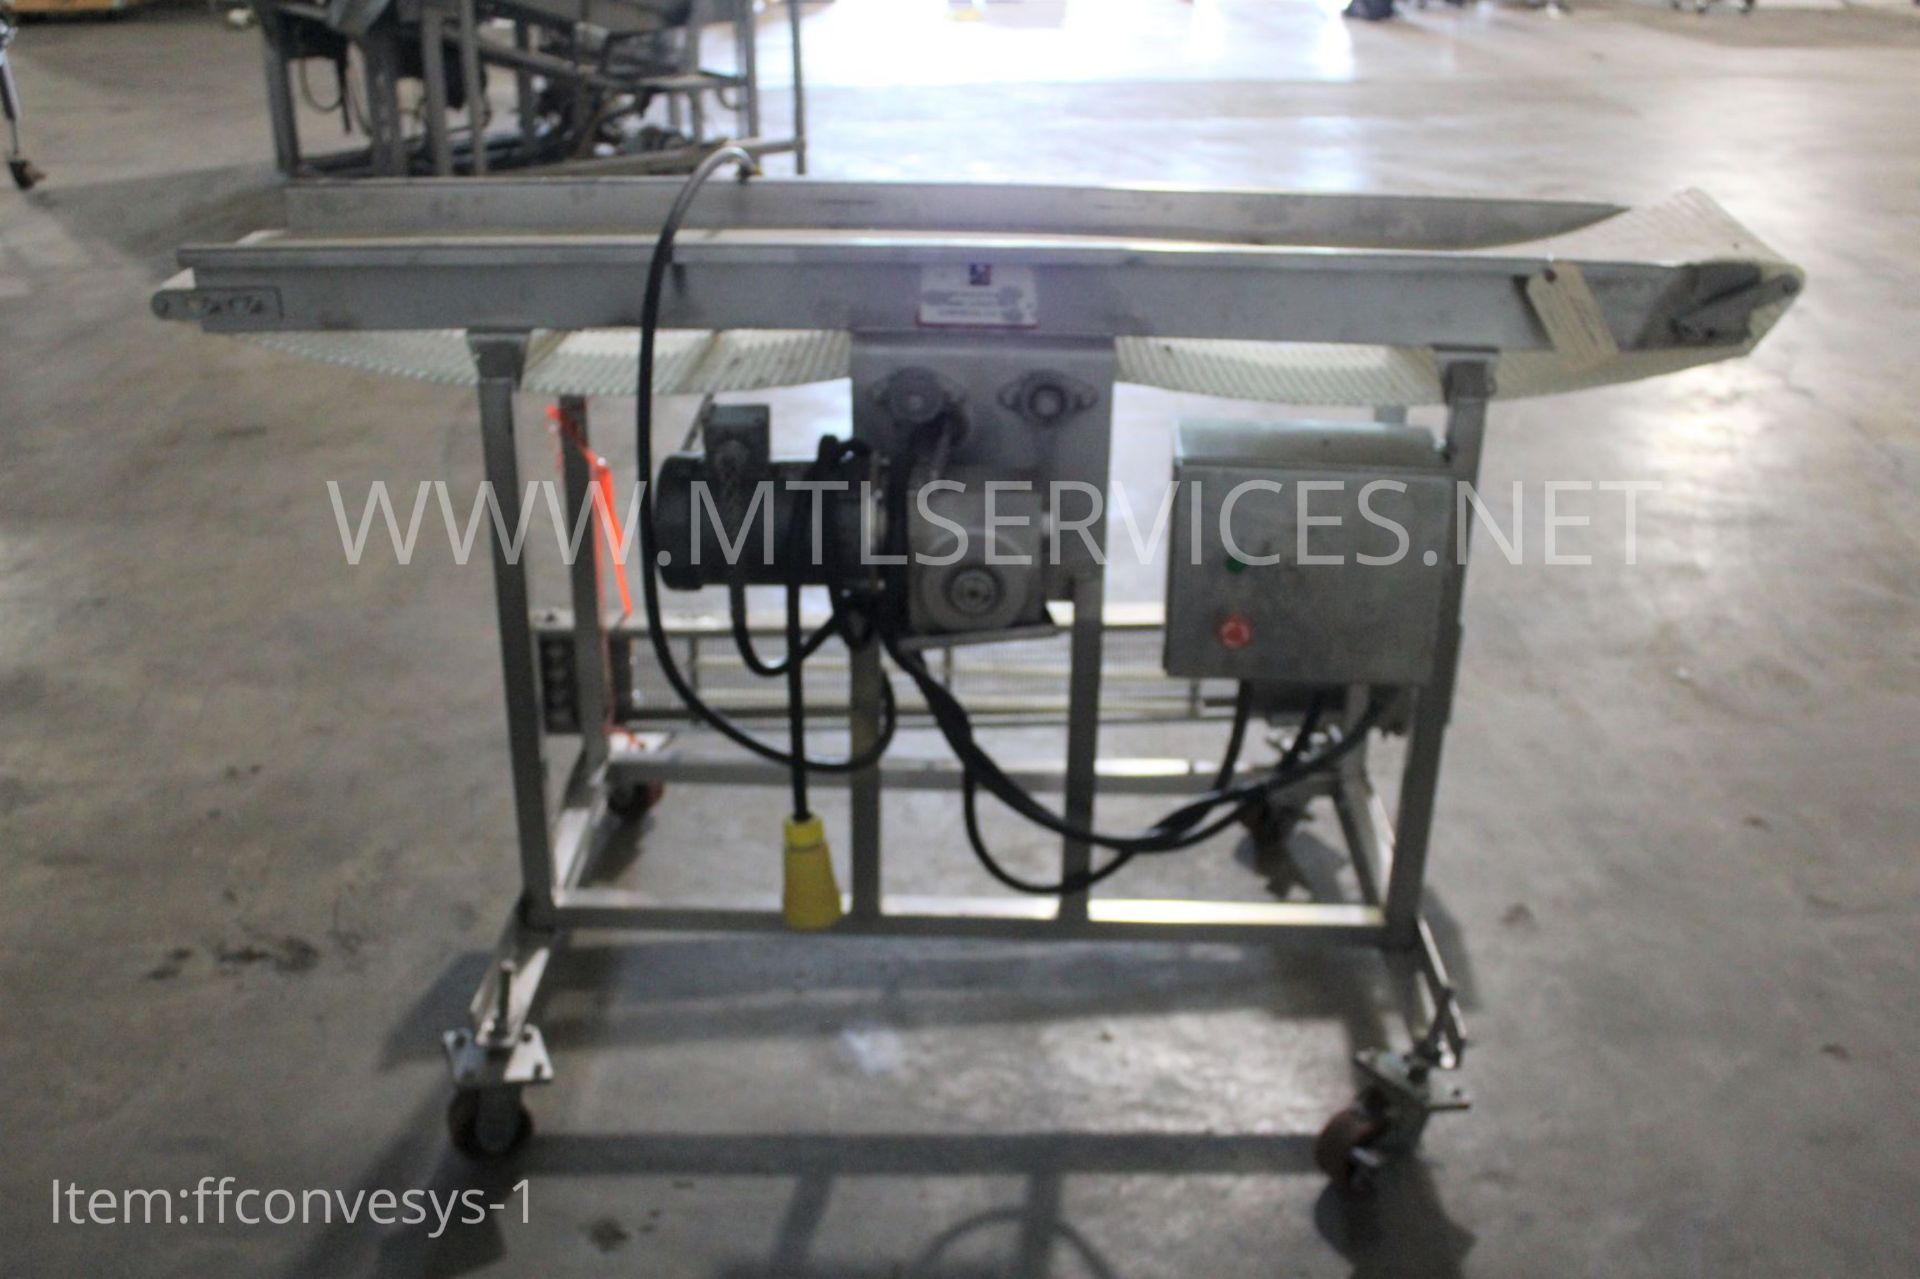 Conveyor System, 76" long x 12" wide, Electric Drive, Item# ffconvesys-1, Located in: - Image 2 of 3